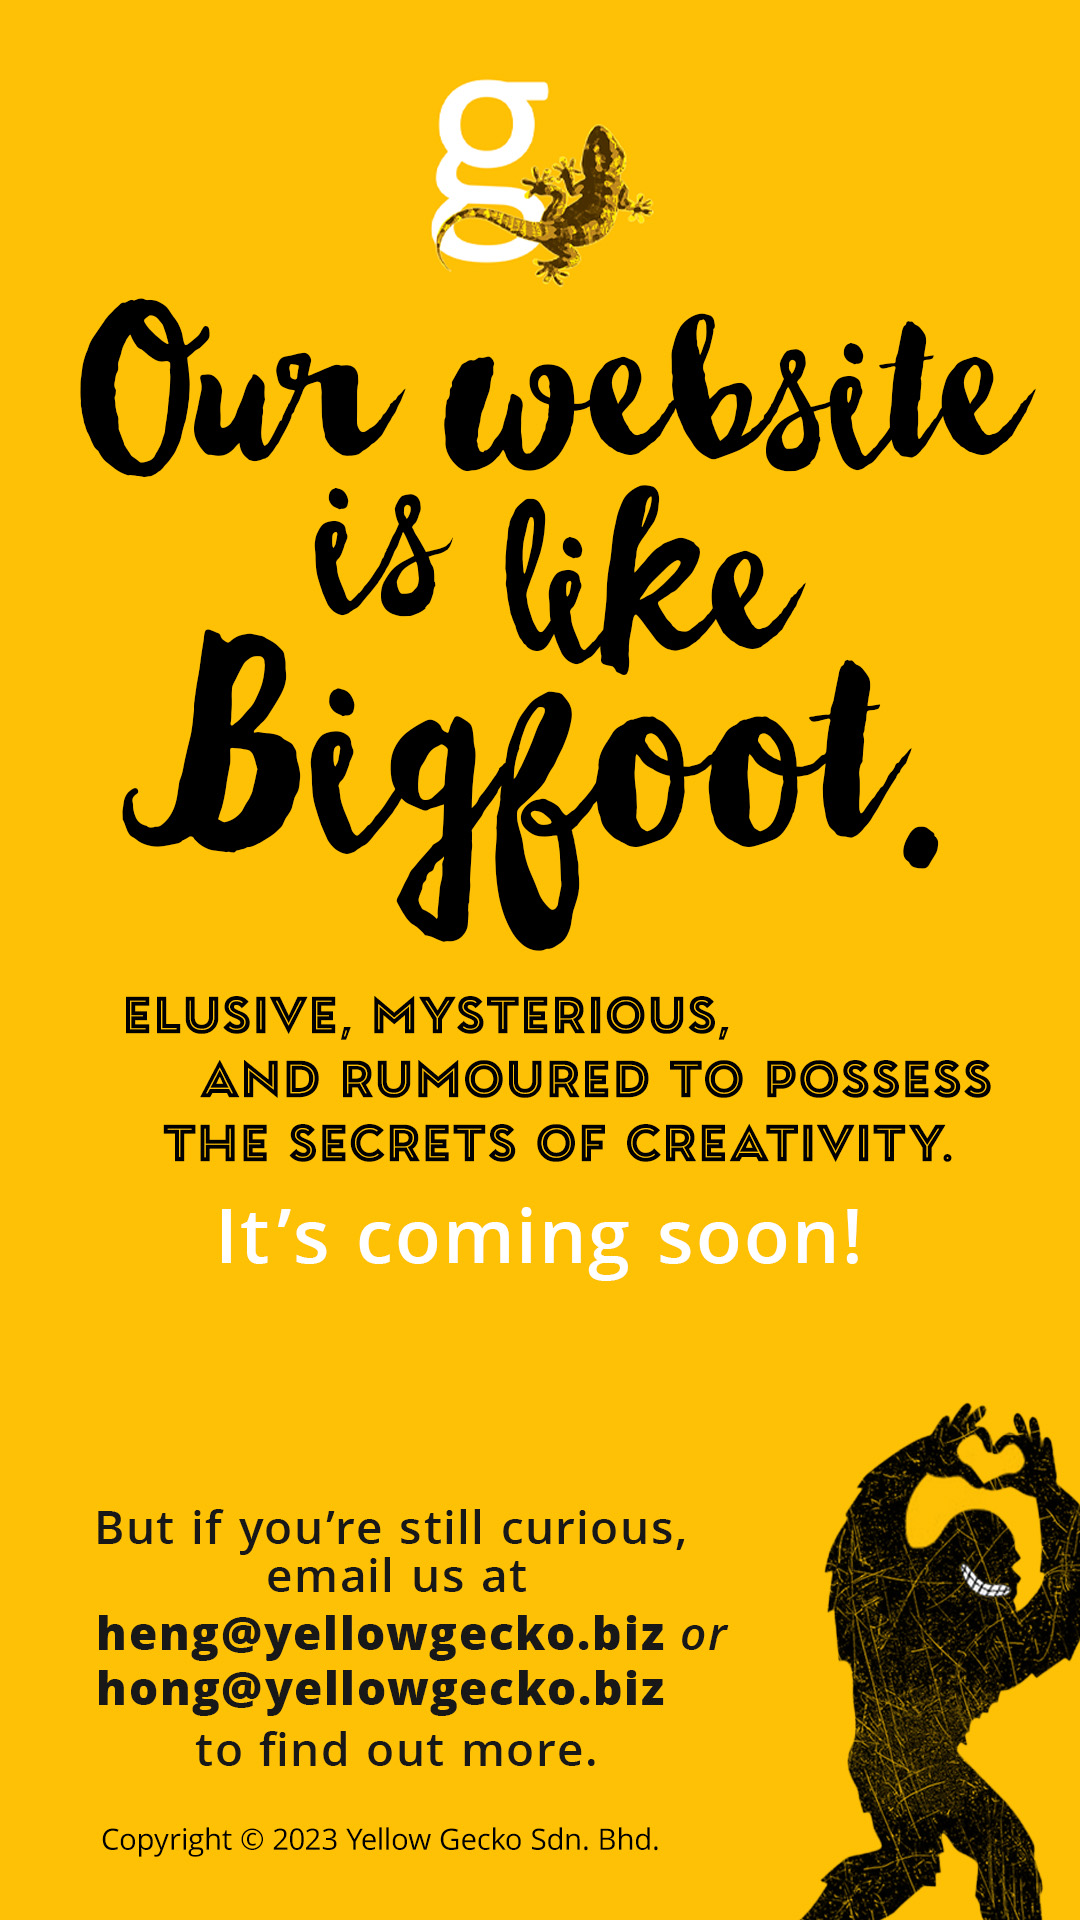 Our website is like Bigfoot. Elusive, mysterious, and rumoured to possess the secrets of creativity. It's coming soon! But if you're still curious, email us at heng@yellowgecko.biz or hong@yellowgecko.biz Copyright © 2023 Yellow Gecko Sdn. Bhd.